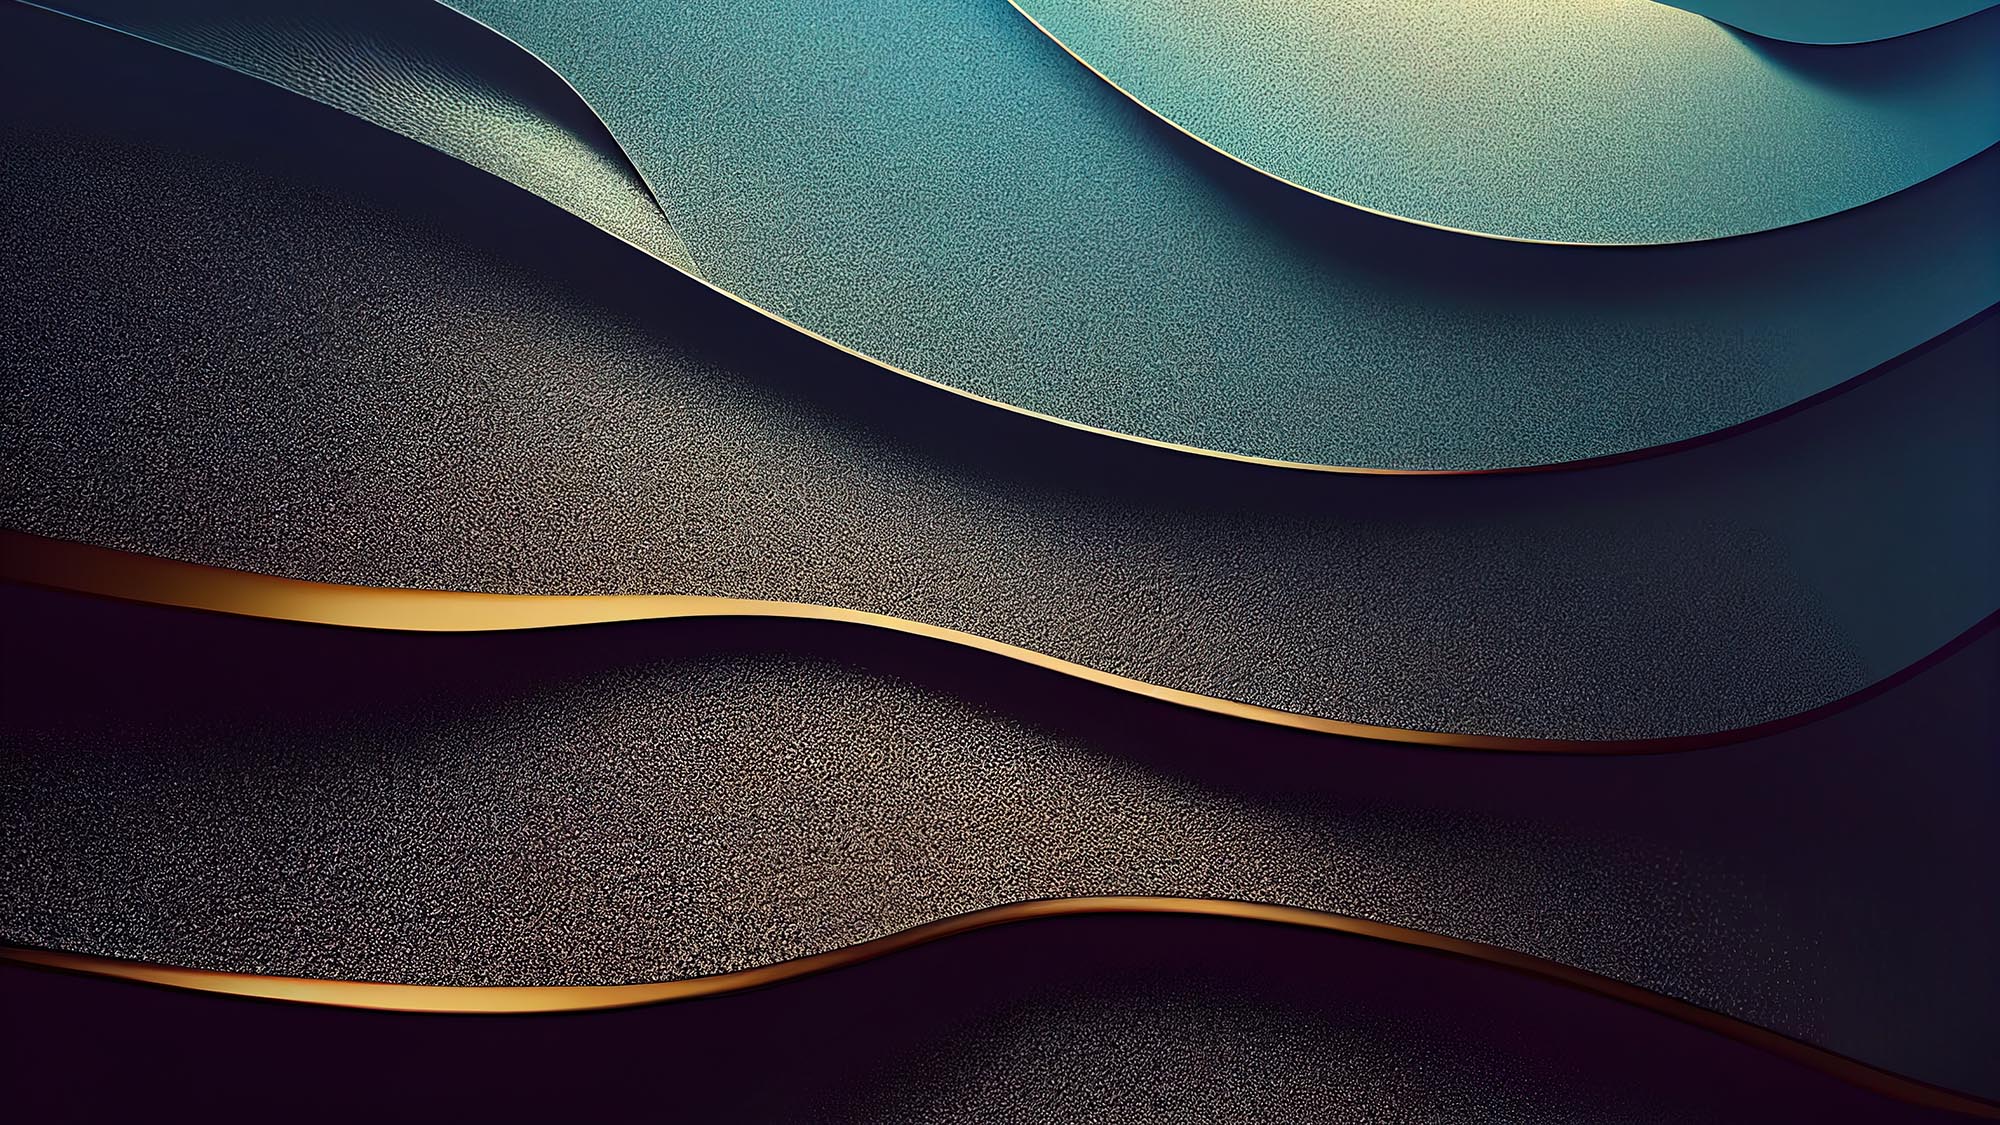 Abstract wavy blue wallpaper with golden lines. Waves background with curvy details.